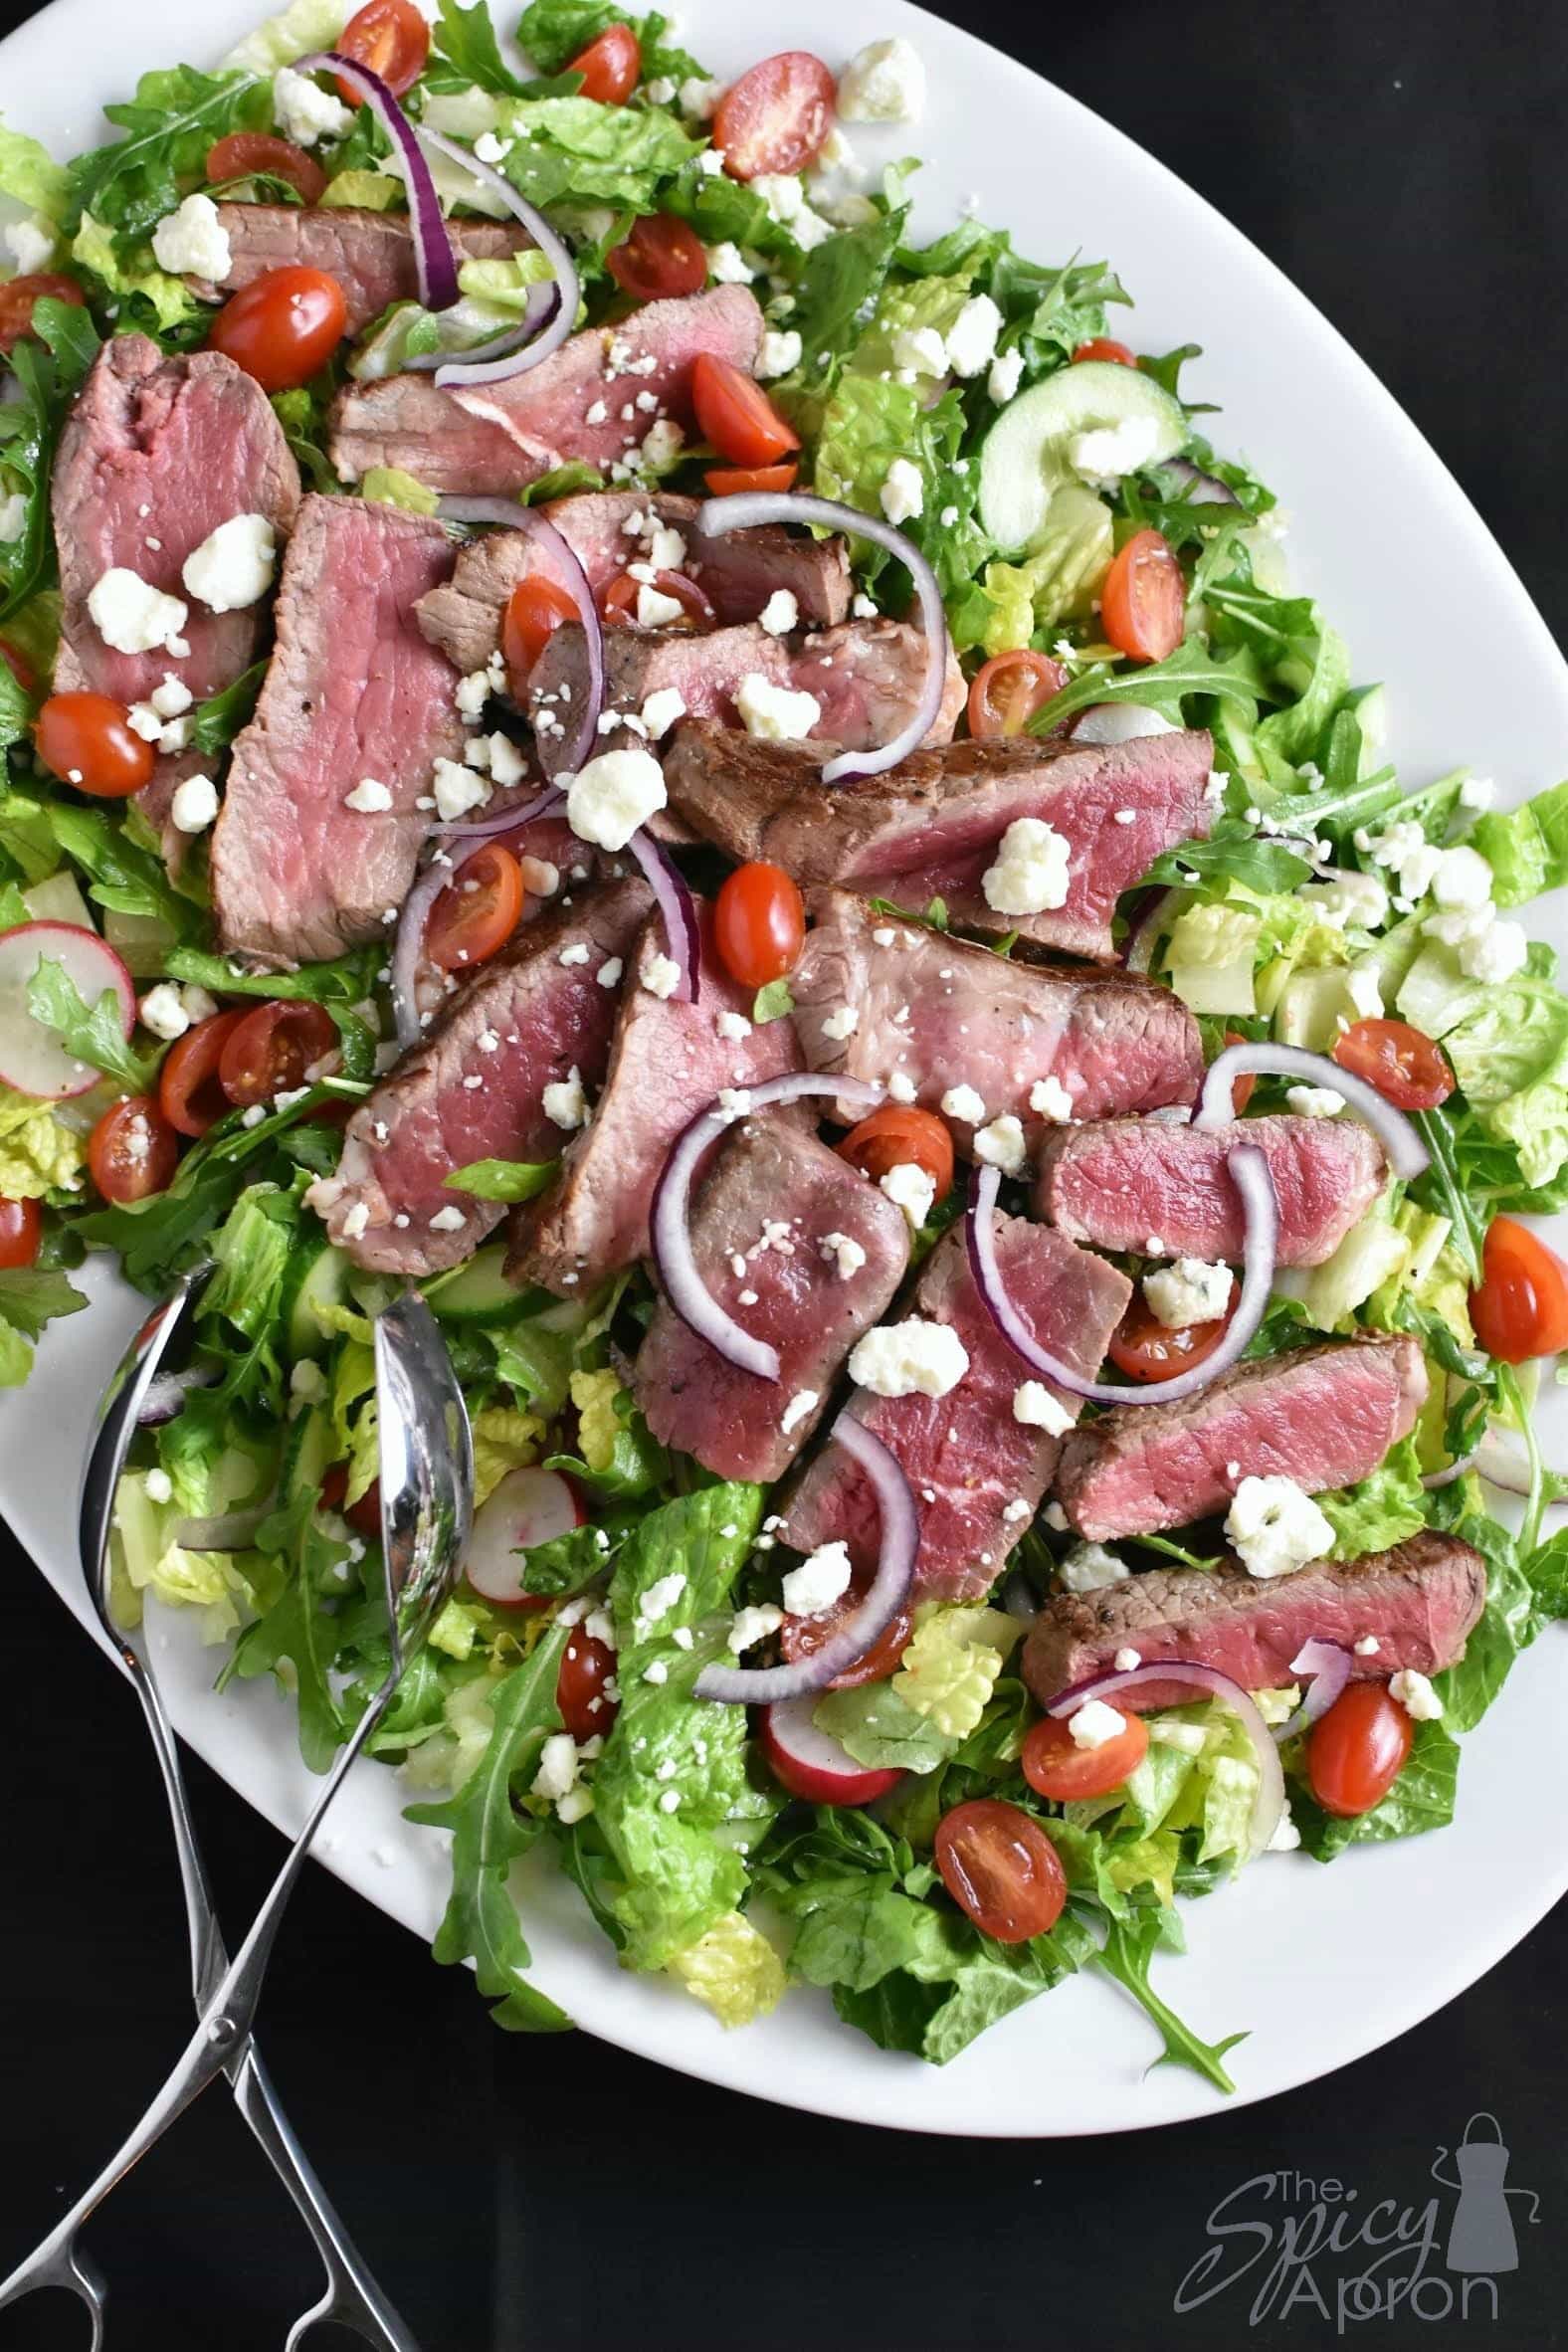 Steak Salad with Blue Cheese Crumbles